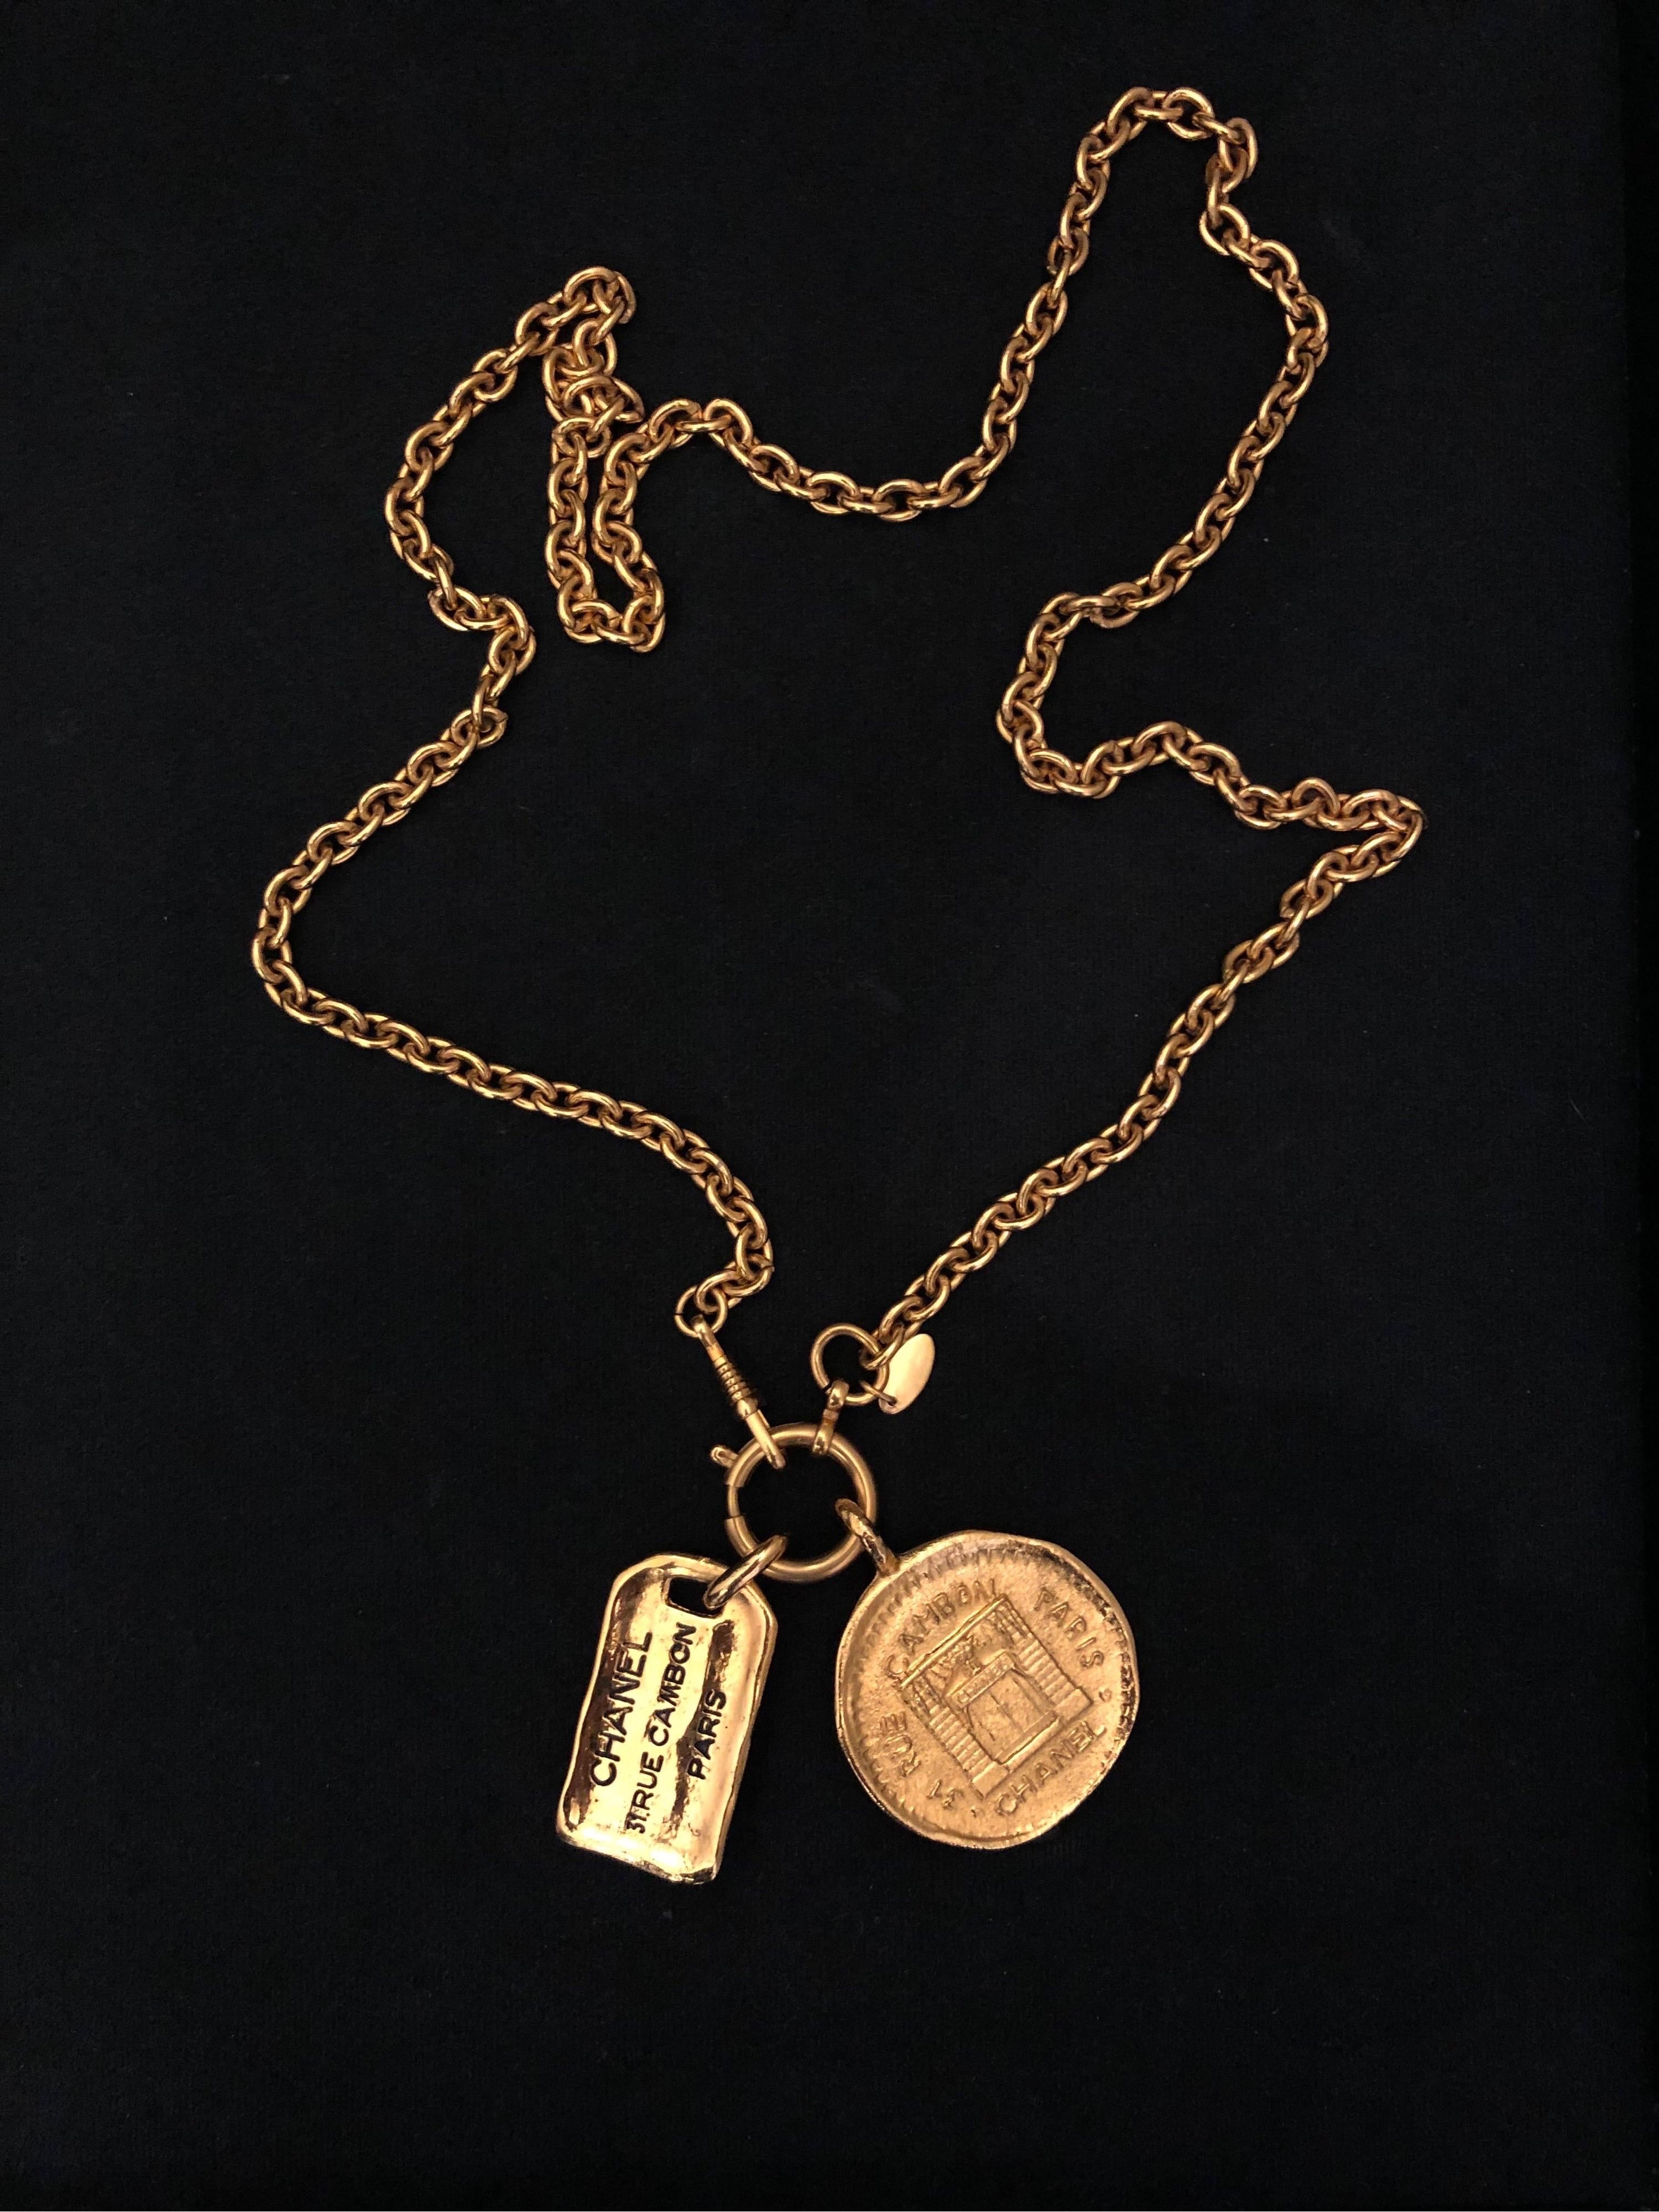 1980s charm necklace